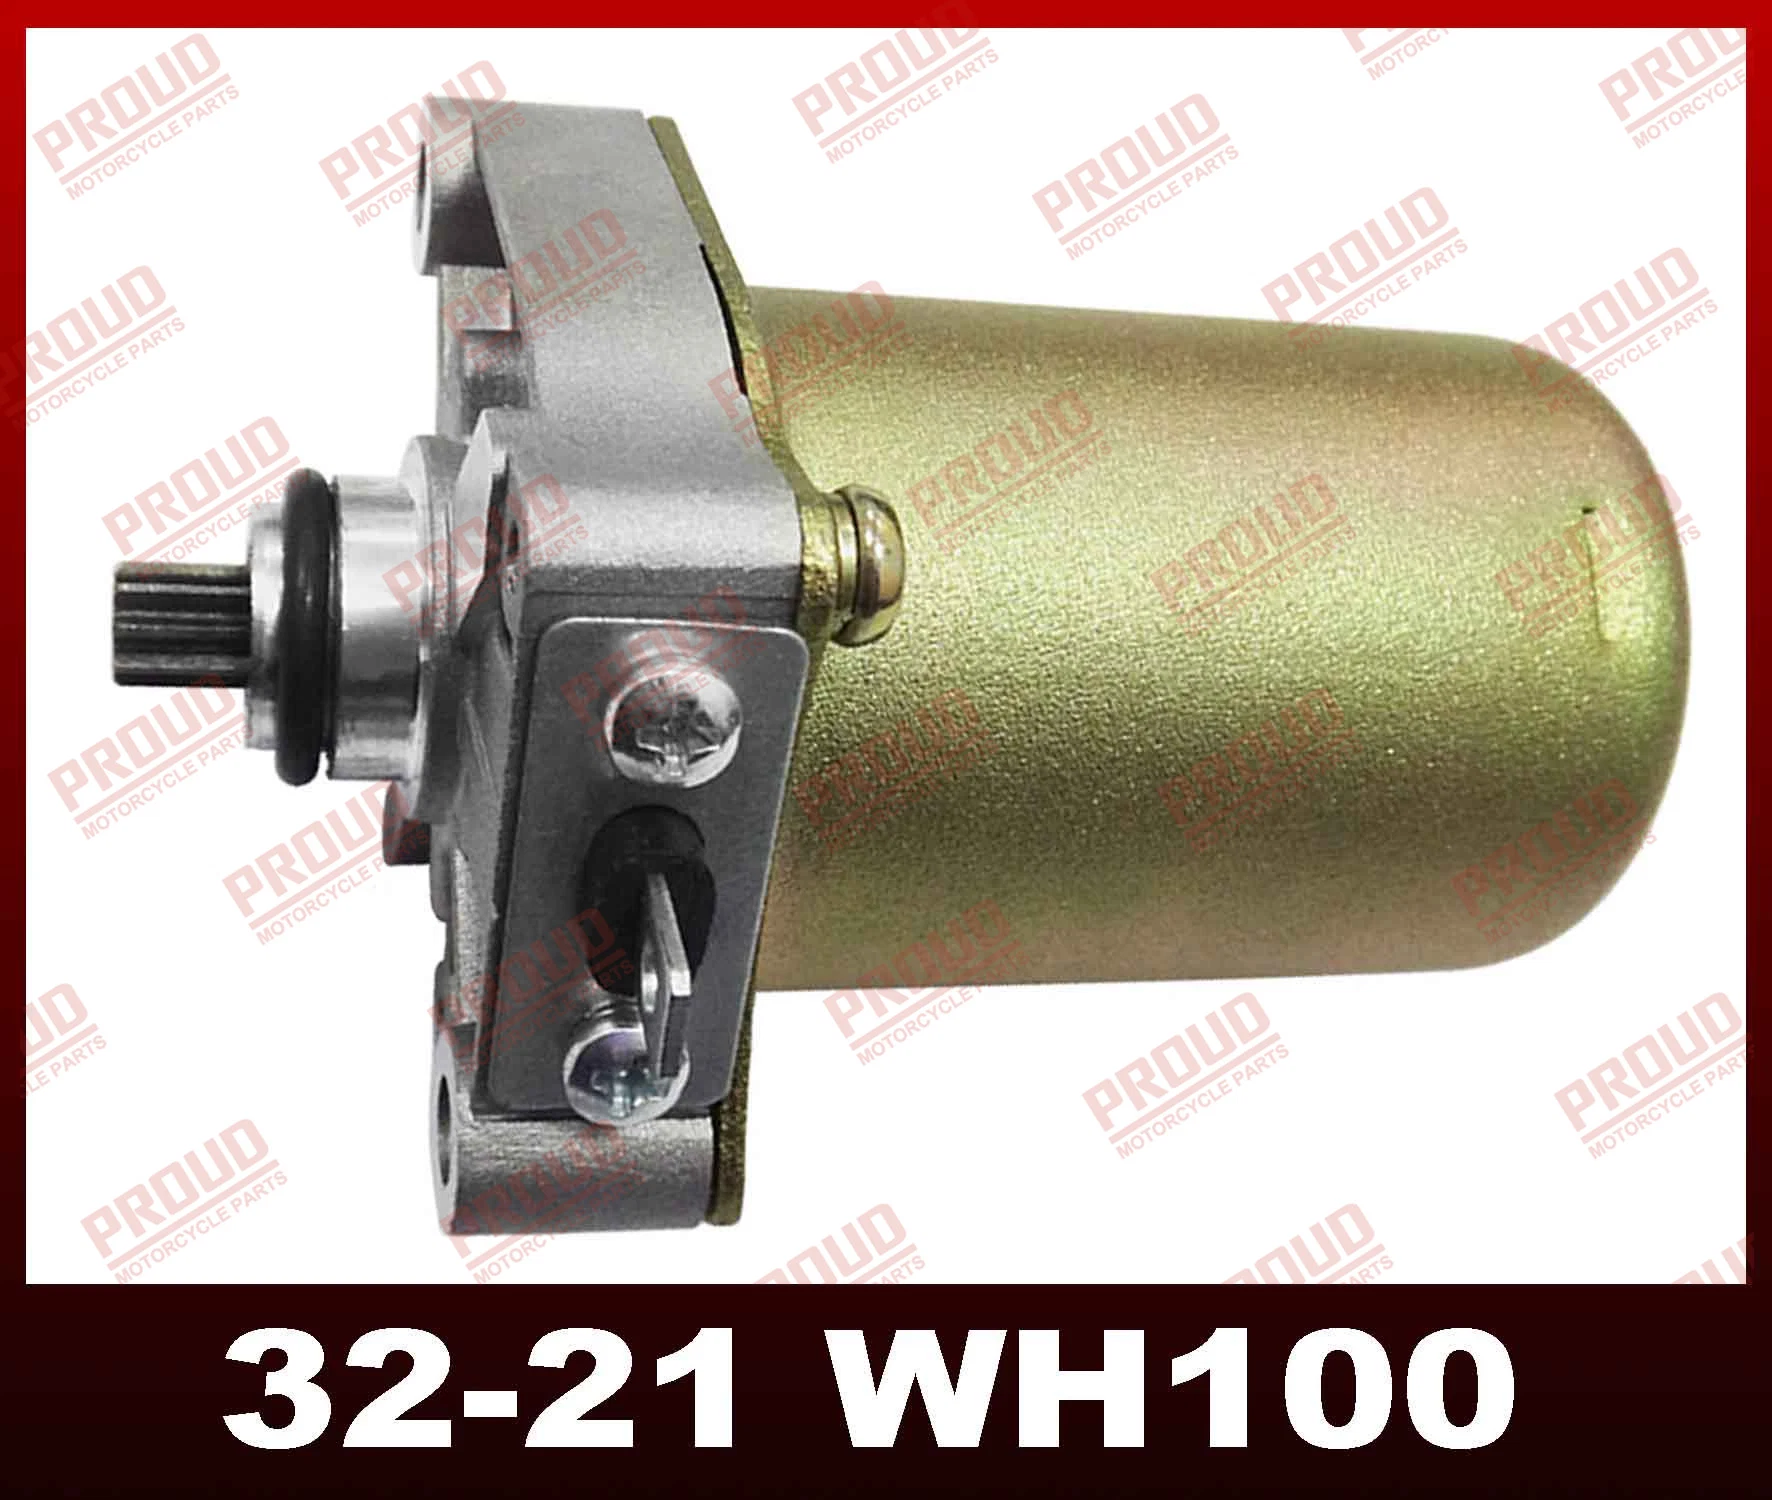 Wh100/125 Starting Motor High Quality Wh100 Motorcycle Spare Parts